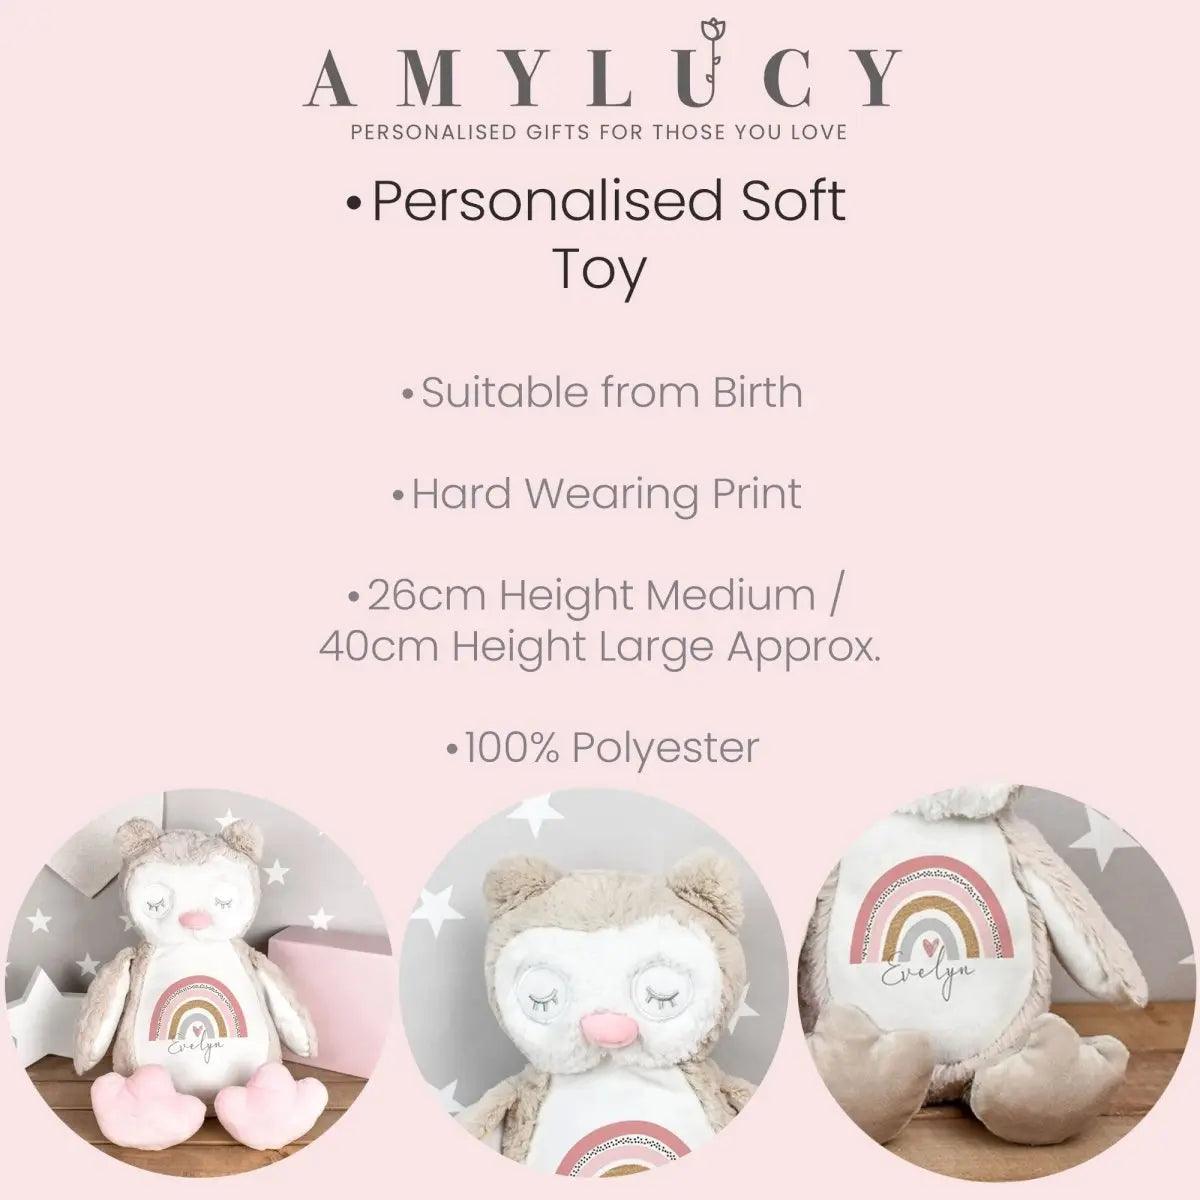 Personalised Owl Teddy, New Baby Gift, Customised Plush Soft Toy, Your Name Teddy, Cuddly Toy, Girls and Boys Owl Teddy, Baby Shower Gift - Amy Lucy